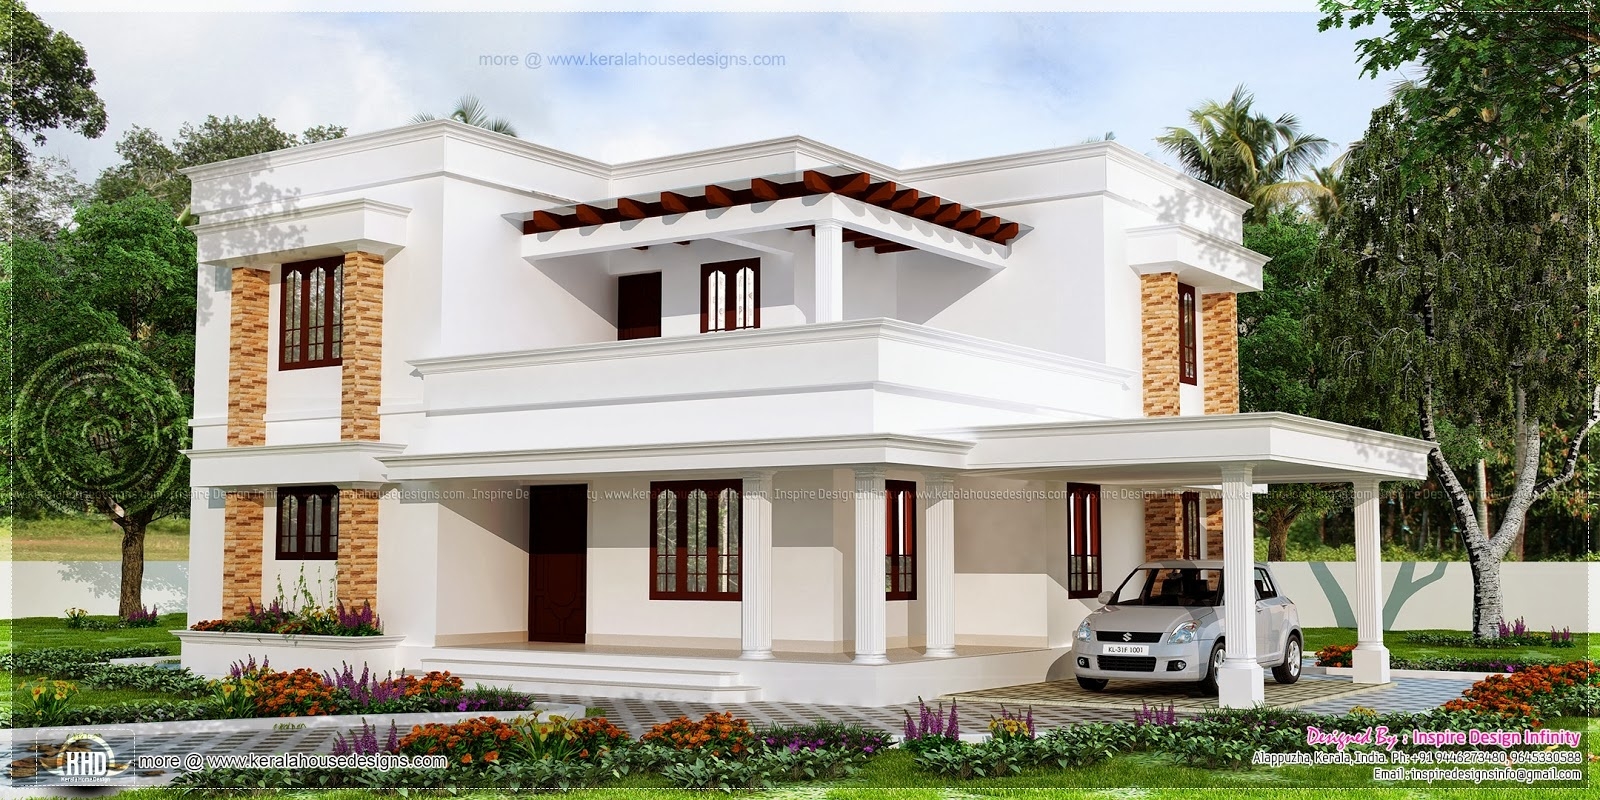 Gorgeous 167 square meter flat roof white color house kerala home design and throughout astonishing to download images of roof of flat houses